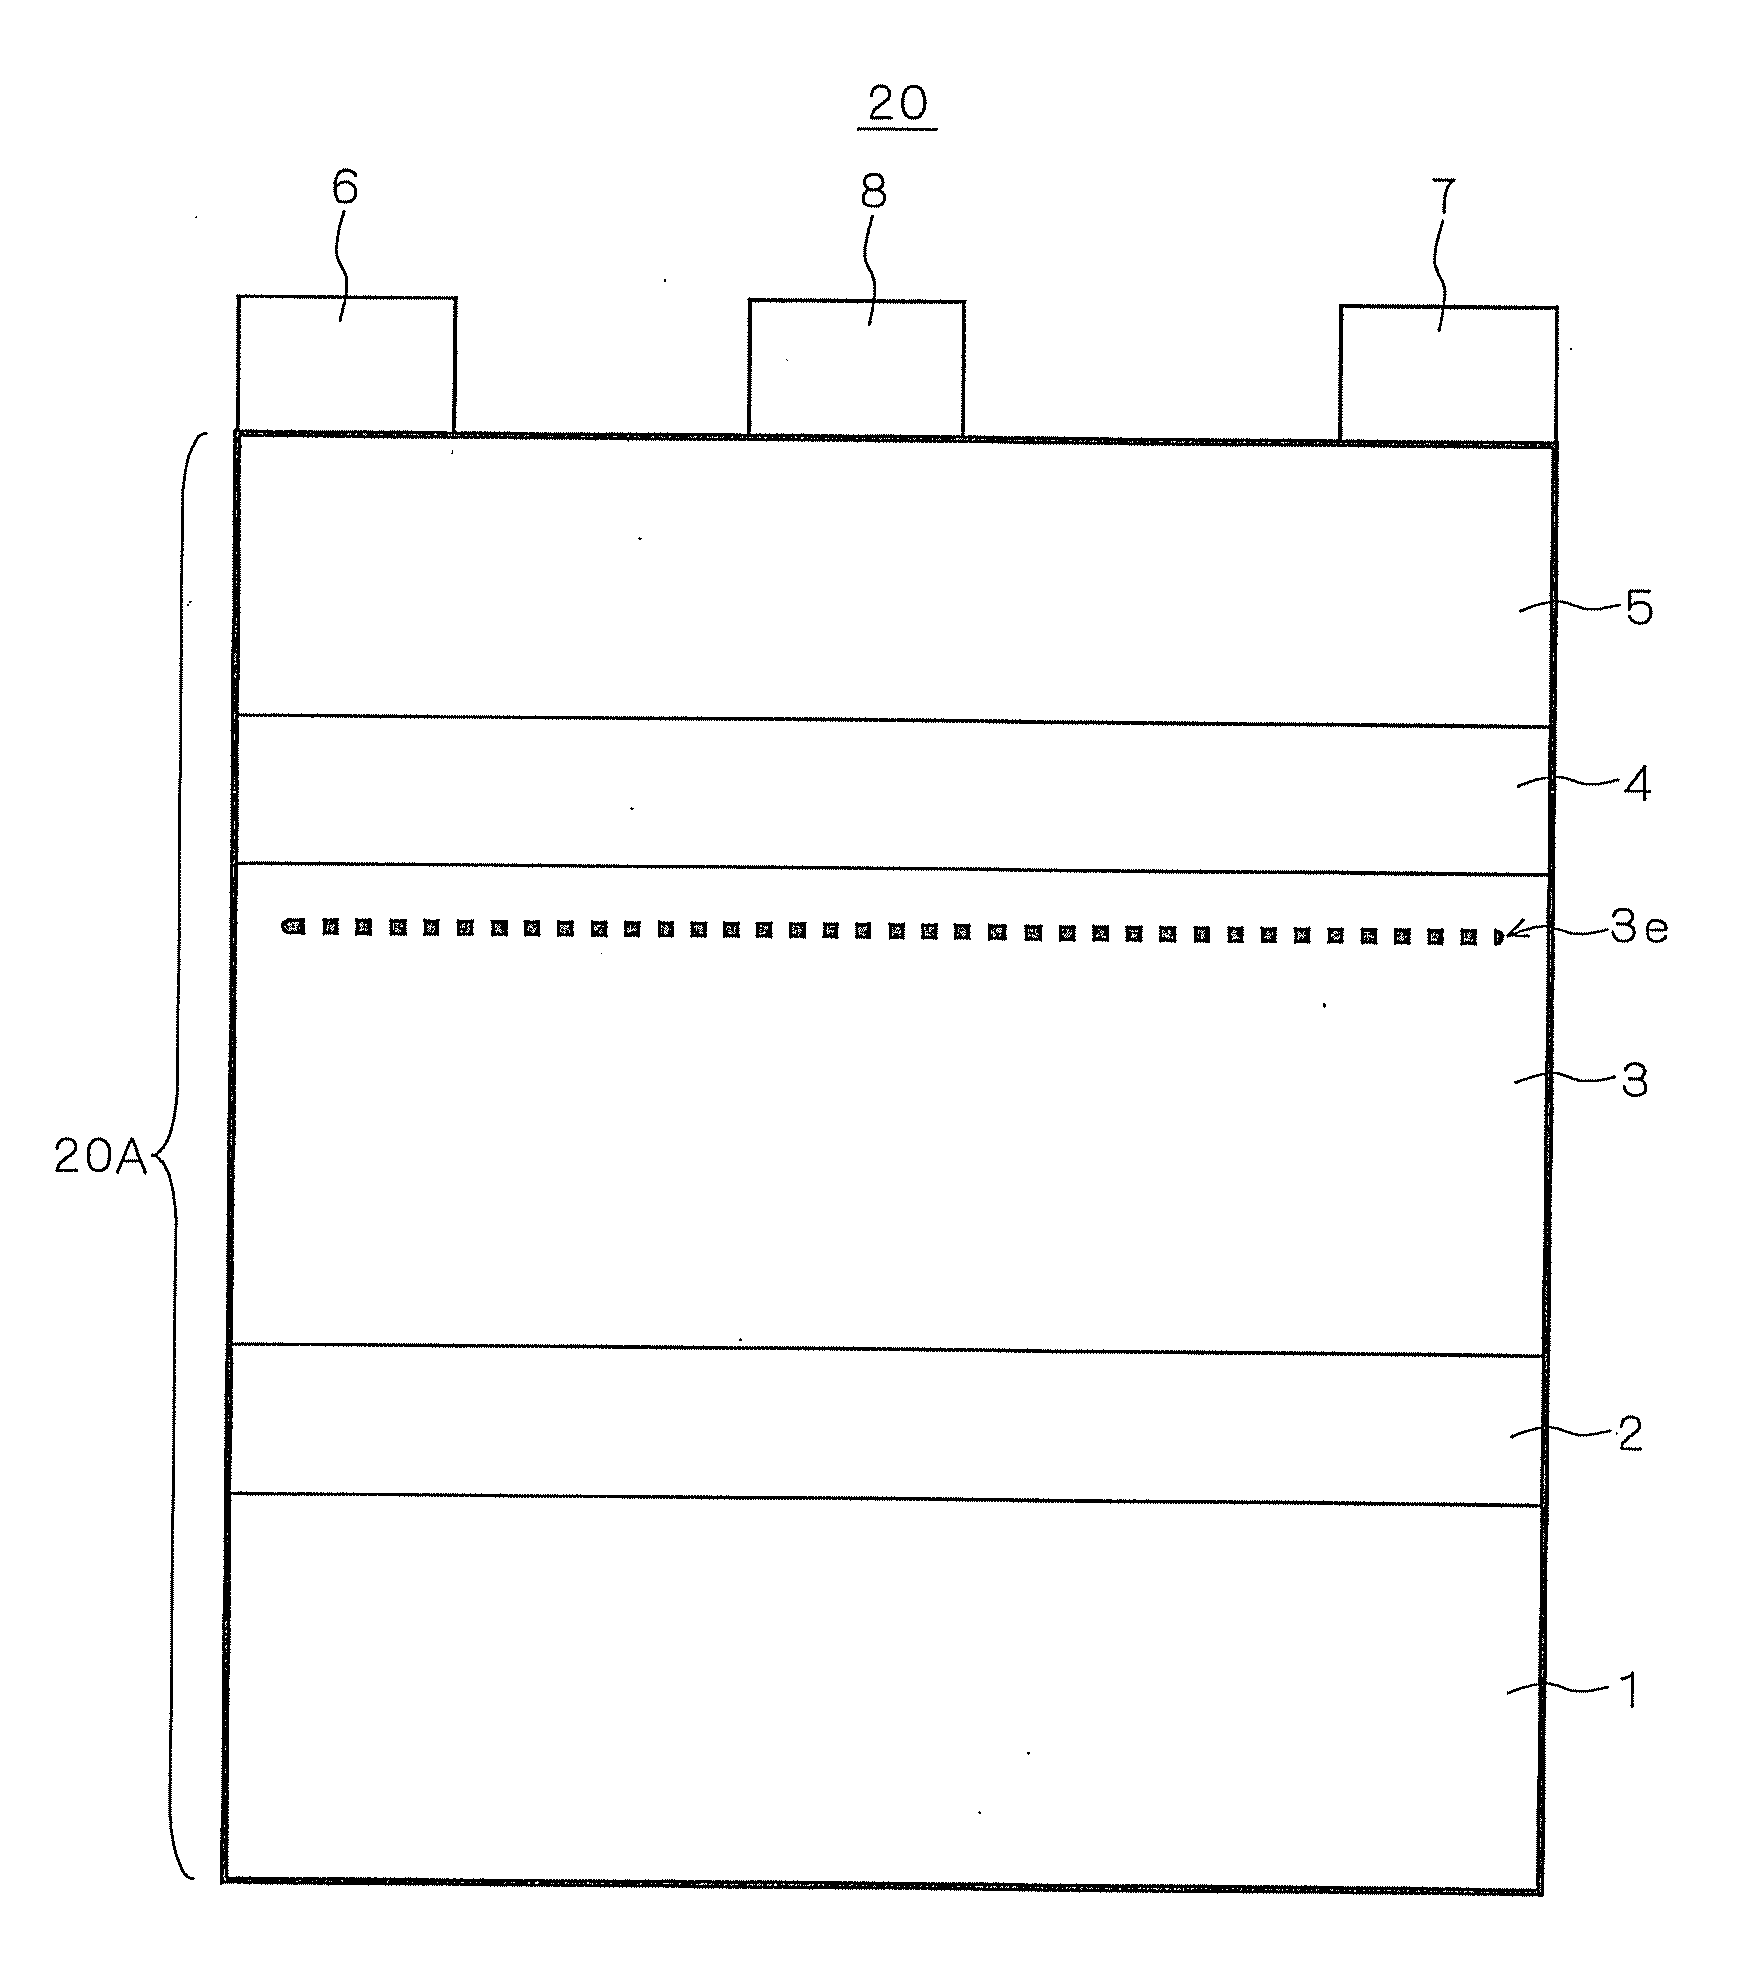 Epitaxial substrate for semiconductor device, semiconductor device, and process for producing epitaxial substrate for semiconductor device